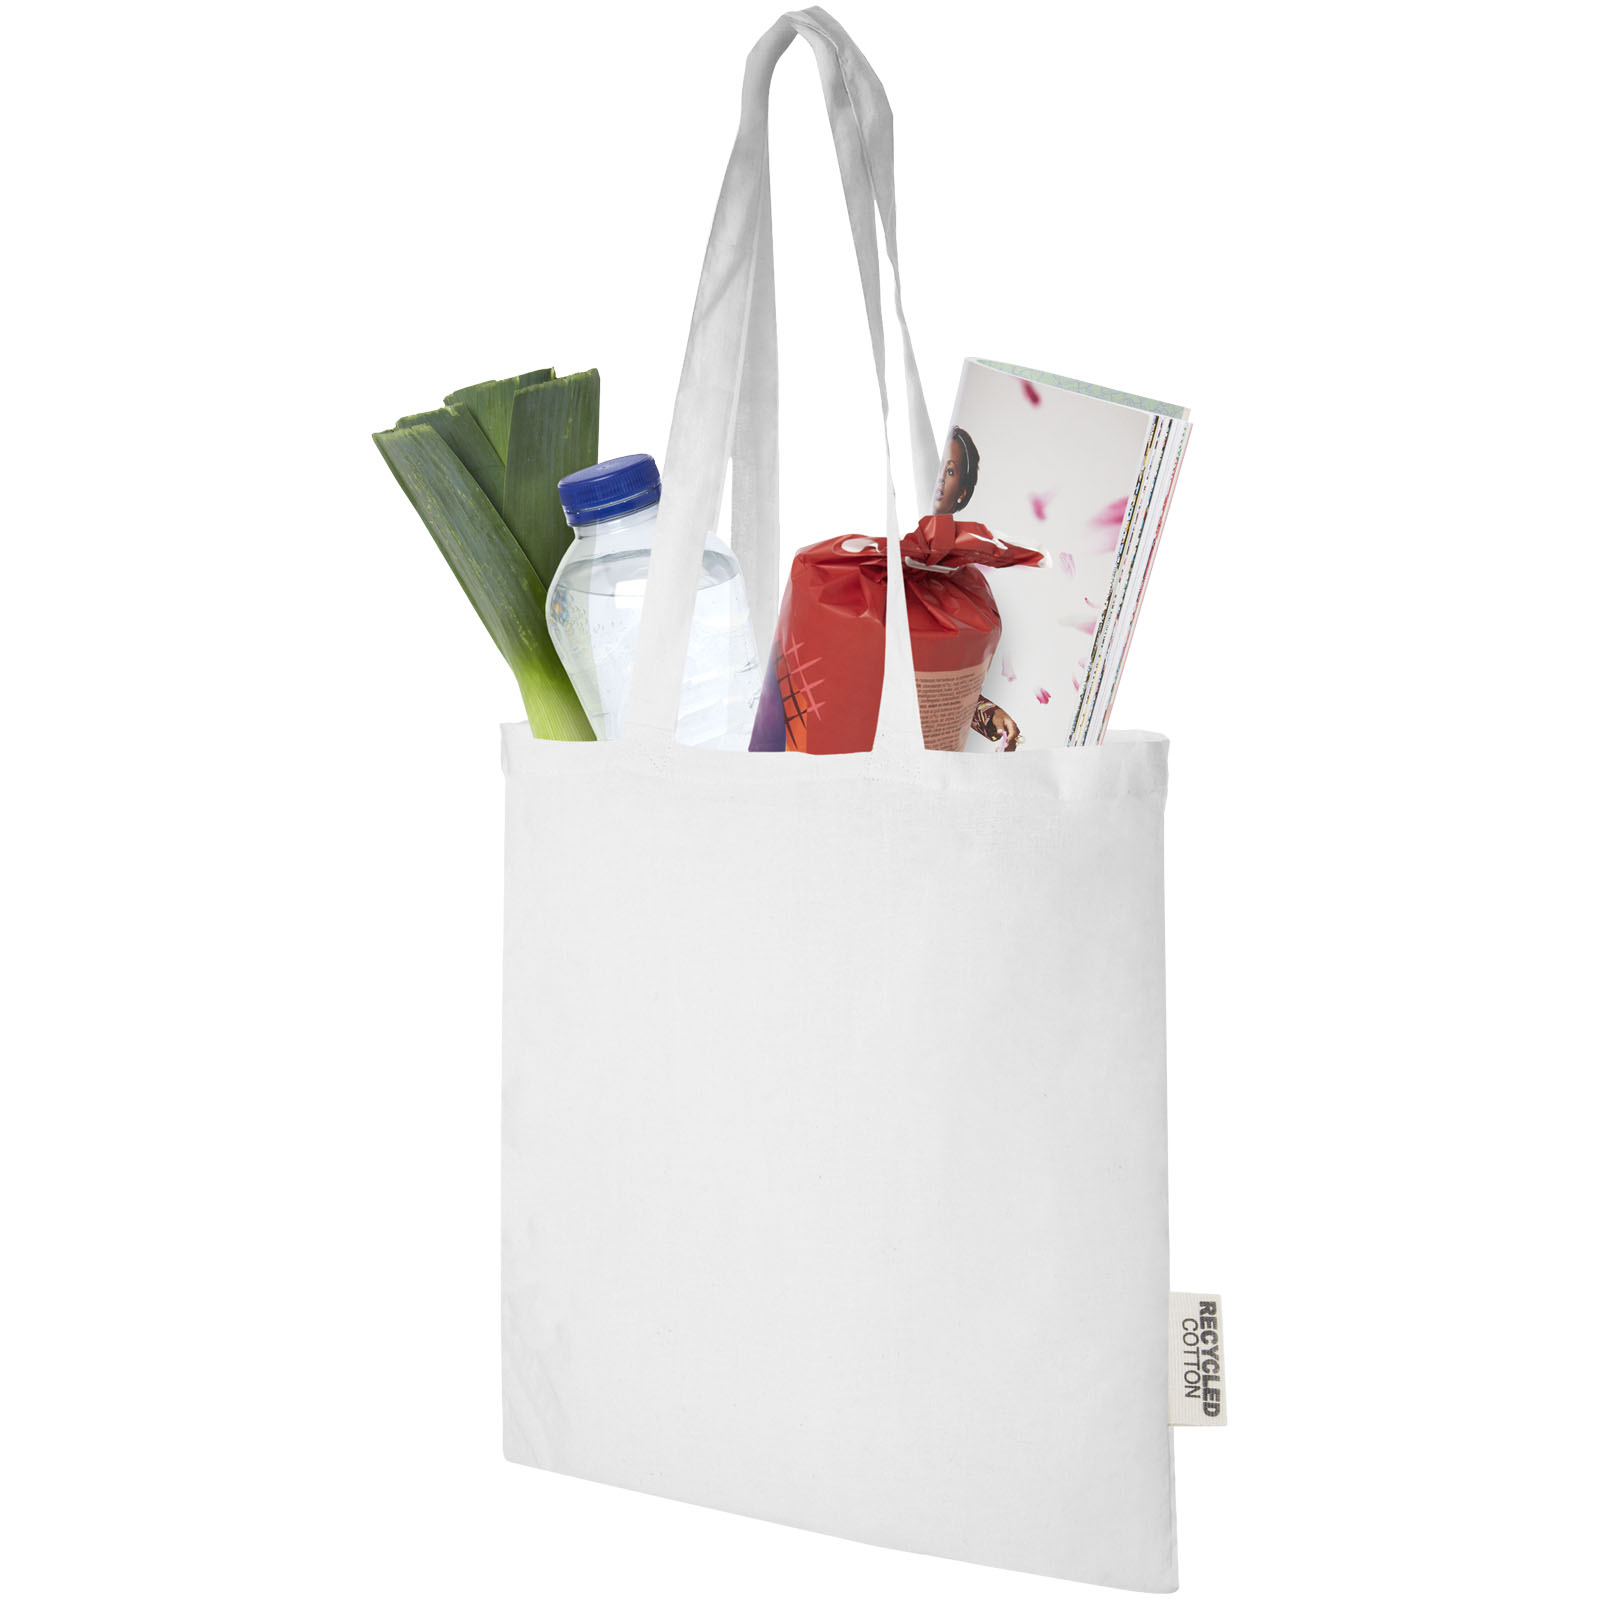 Advertising Shopping & Tote Bags - Madras 140 g/m2 GRS recycled cotton tote bag 7L - 2